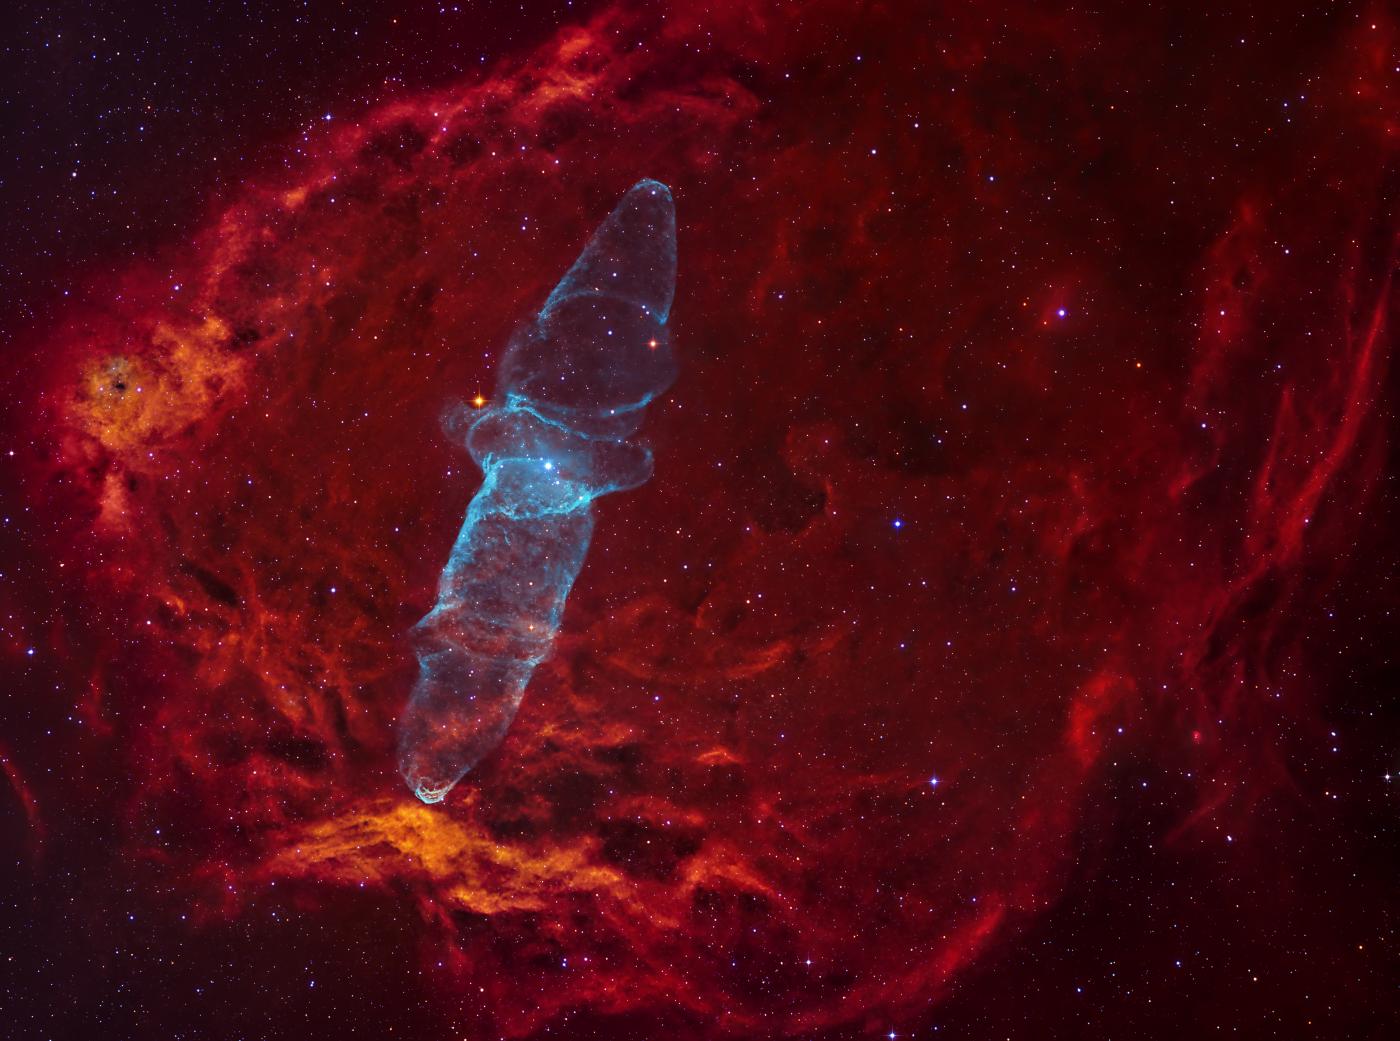 An image showing 'SH2-129 & OU4 - The Flying Bat and Giant Squid Nebula'